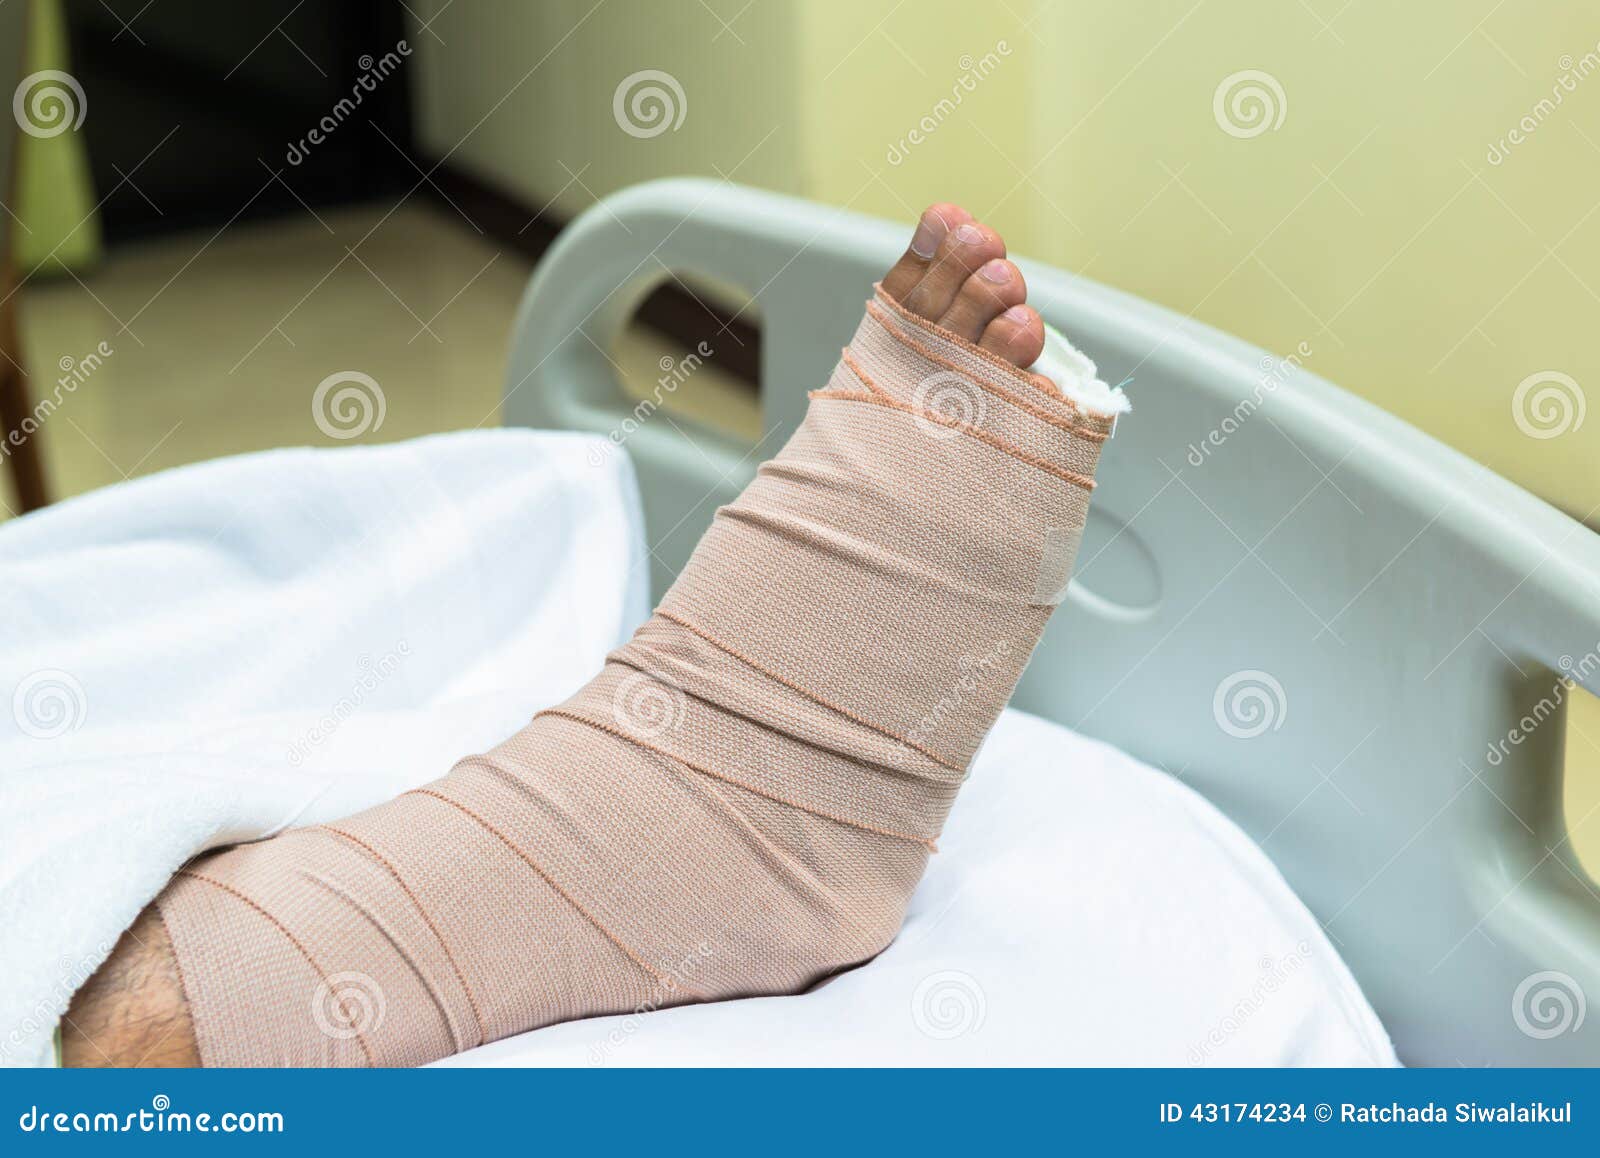 Patient With Broken Leg In Cast And Bandage Stock Photo - Image: 43174234